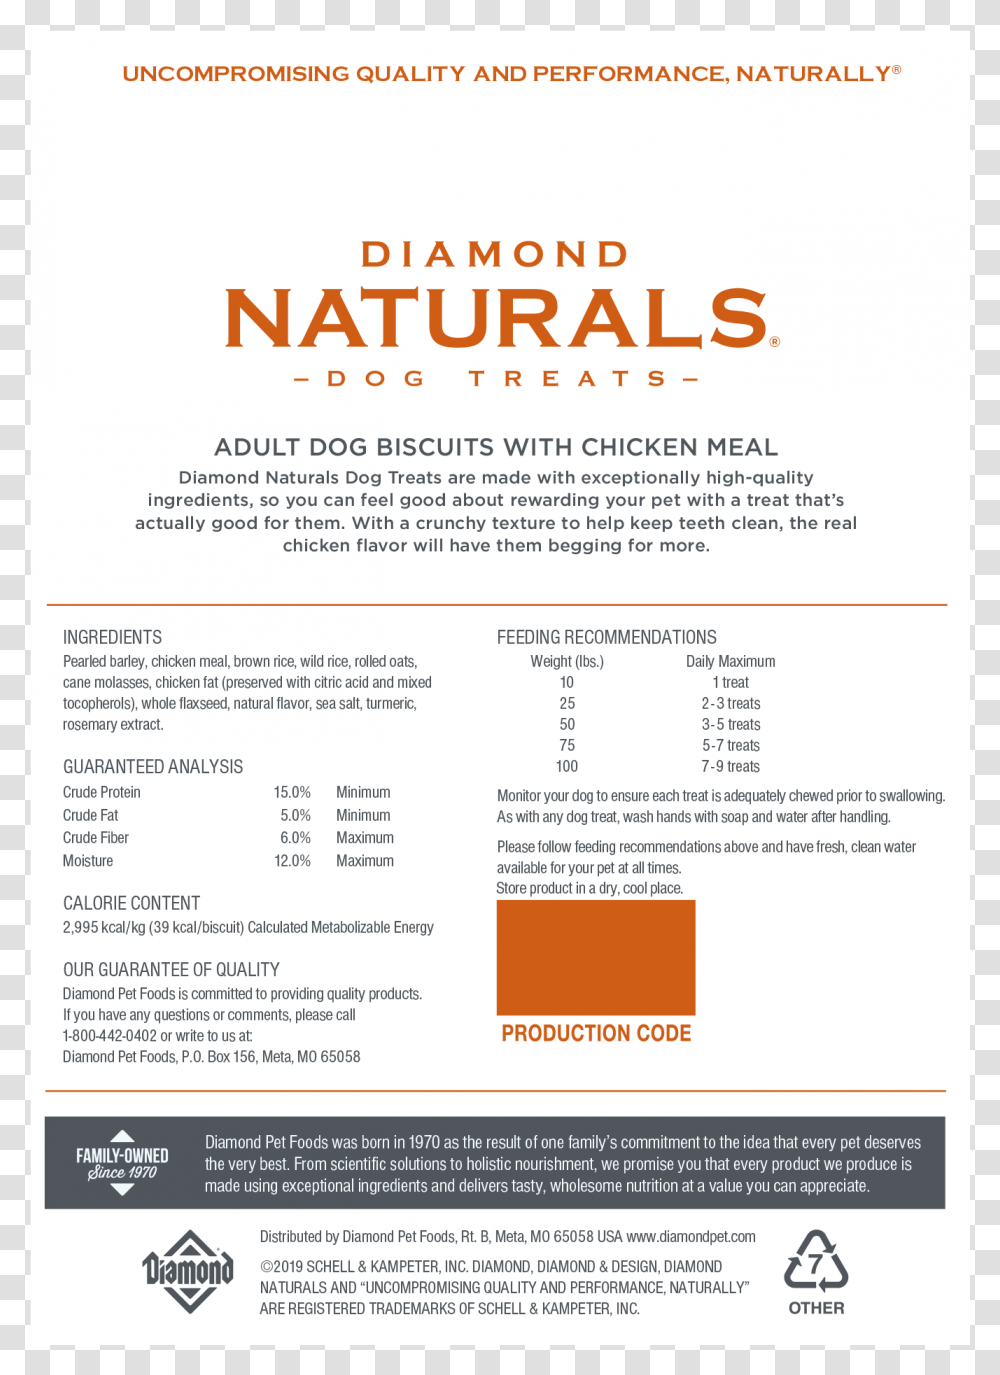 Diamond Naturals Large Breed, Flyer, Poster, Paper, Advertisement Transparent Png